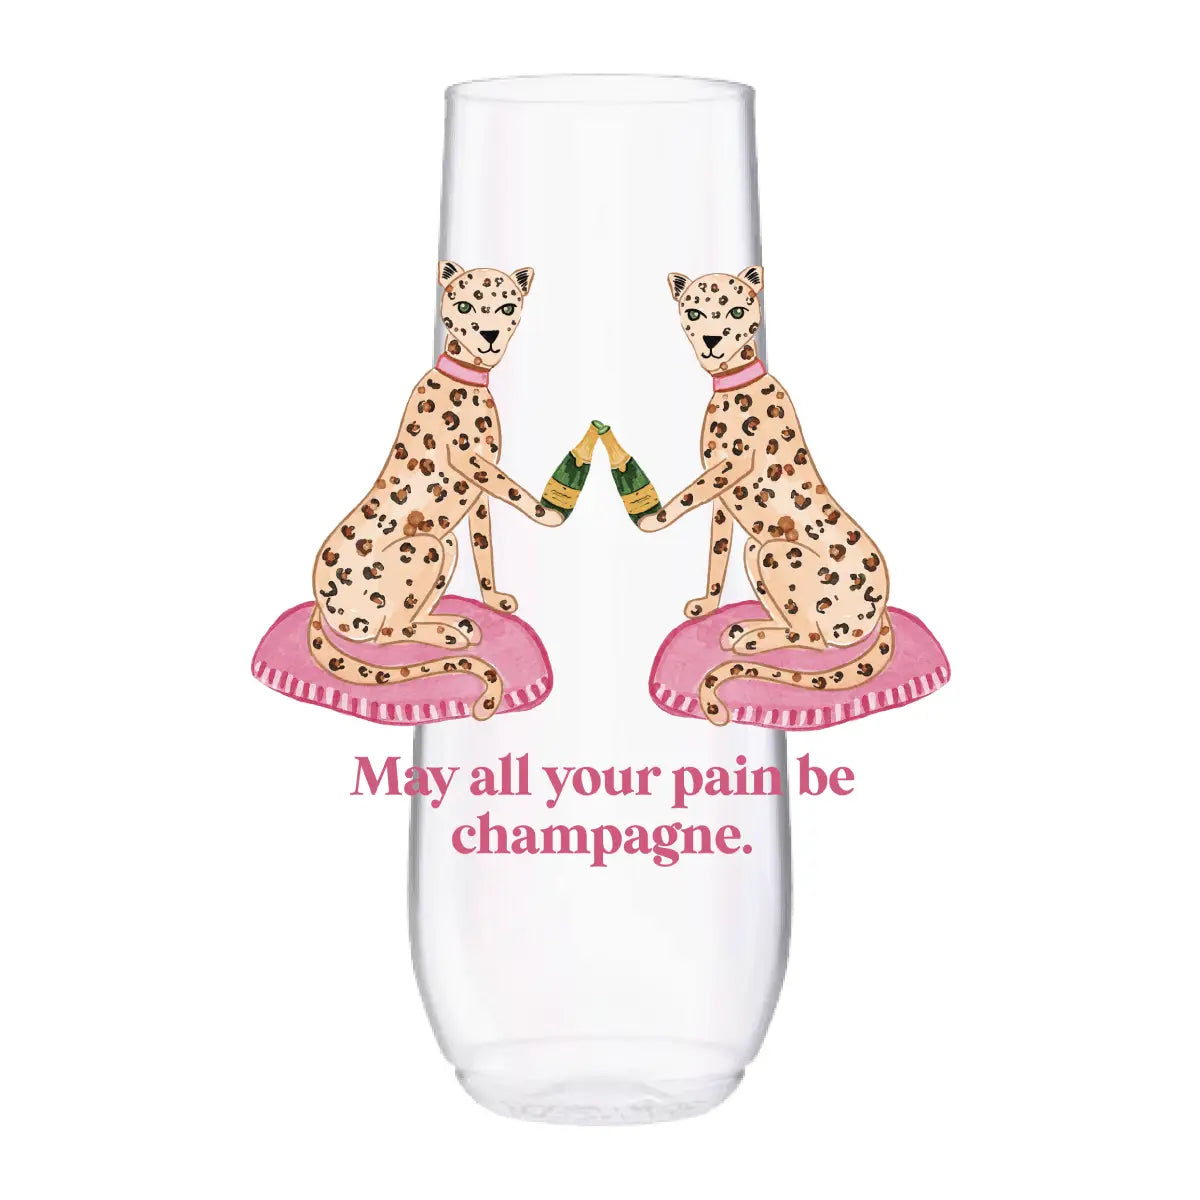 May All Your Pain Be Champagne Reusable Champagne Flutes